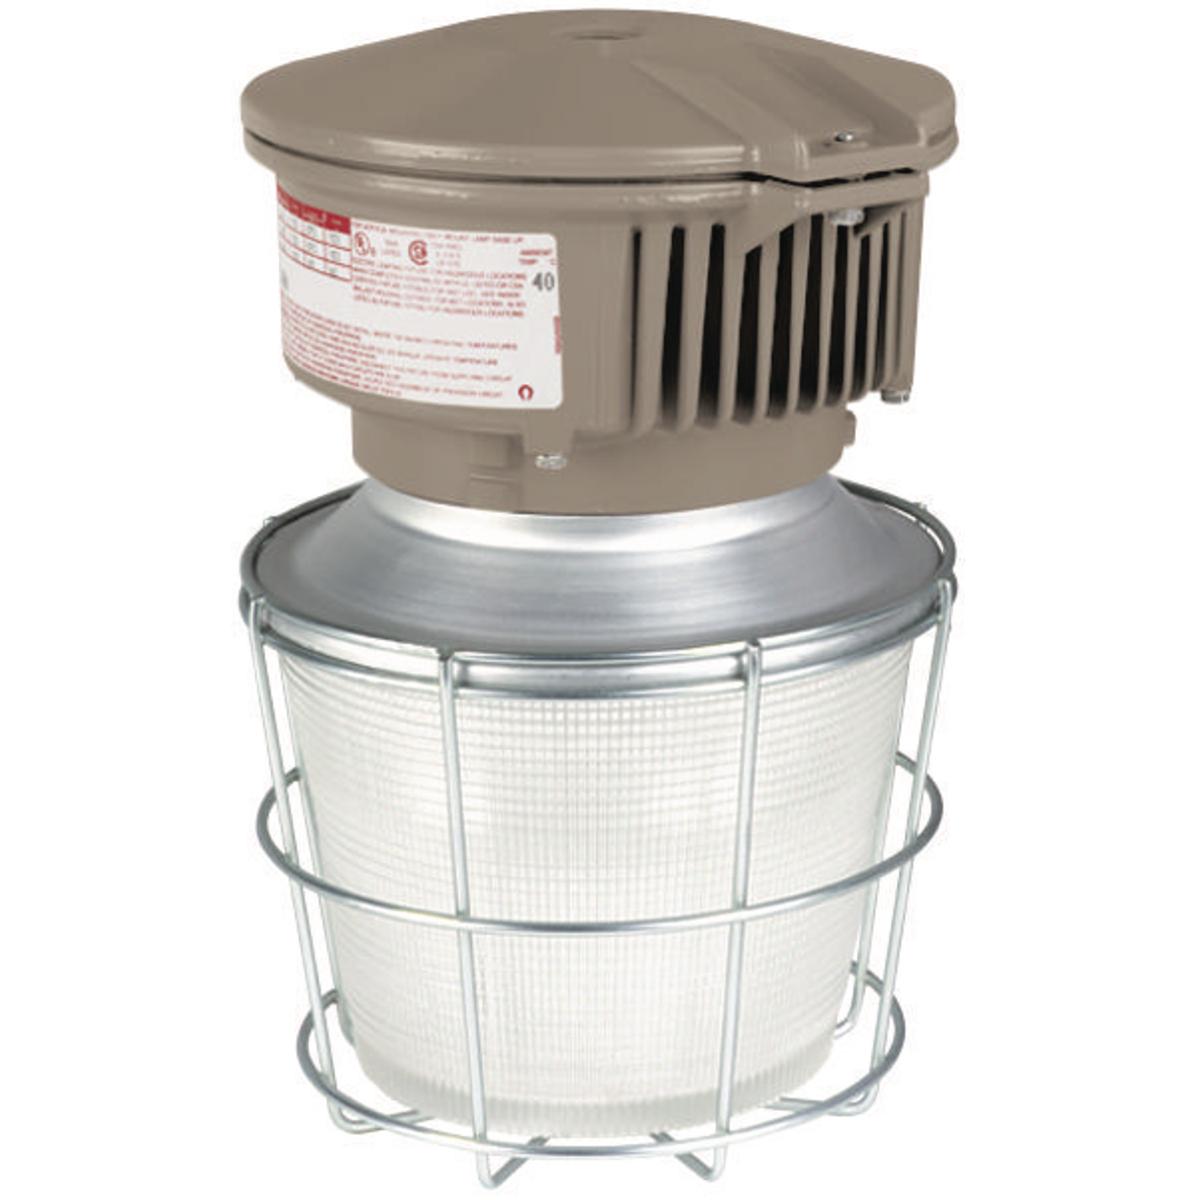 Hubbell MBL2230A2S5G The MBL Series is a compact low bay energy efficient LED. The design of the MBL makes it suitable for harsh and hazardous environments using a cast copper-free aluminum. Its low profile and compact design allow the MBL to fit in areas where larger fixture